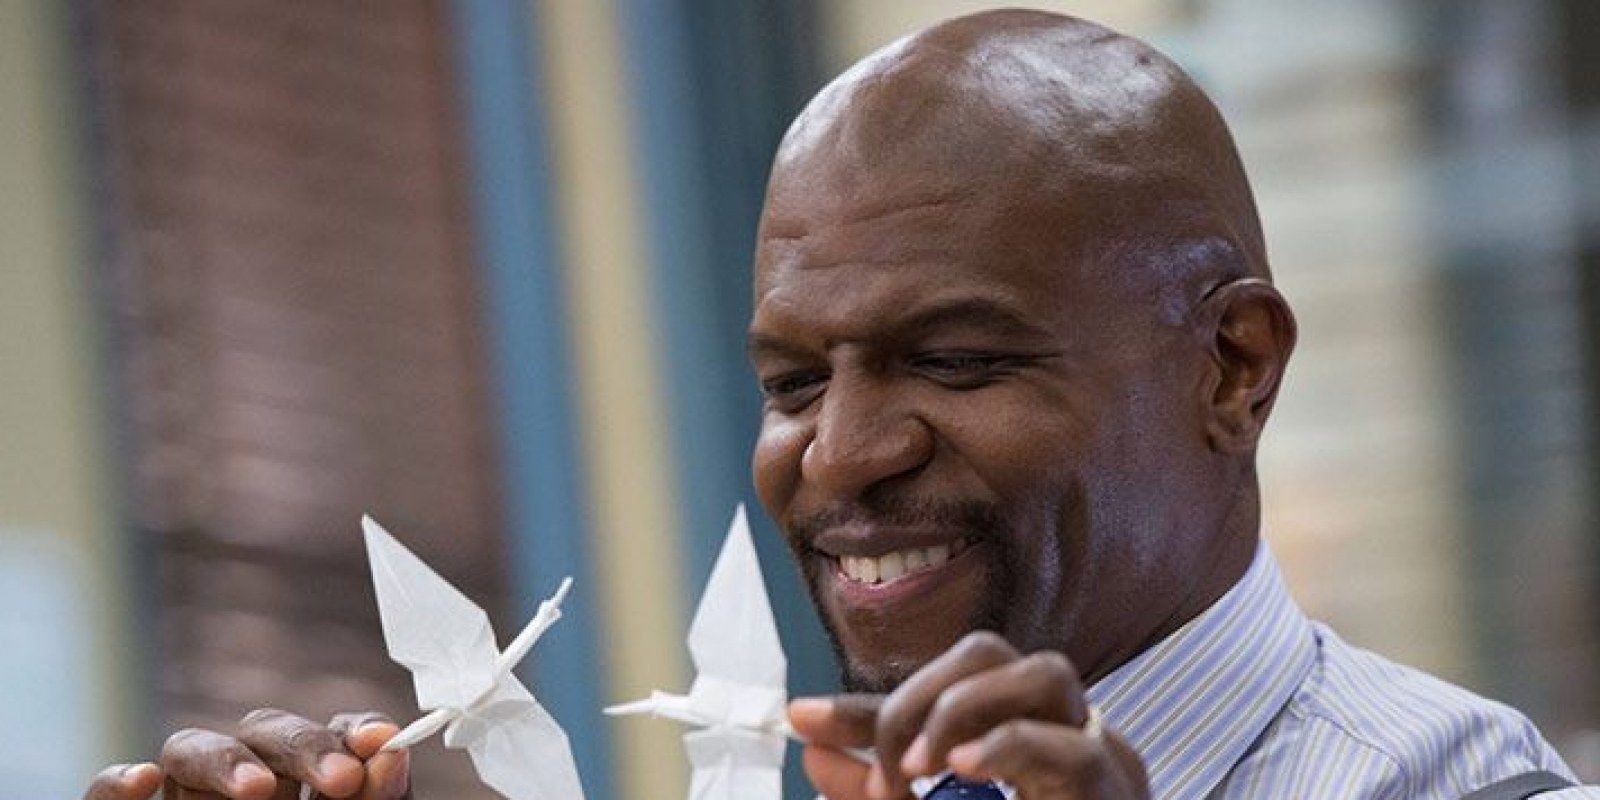 Terry Crews playing with origami